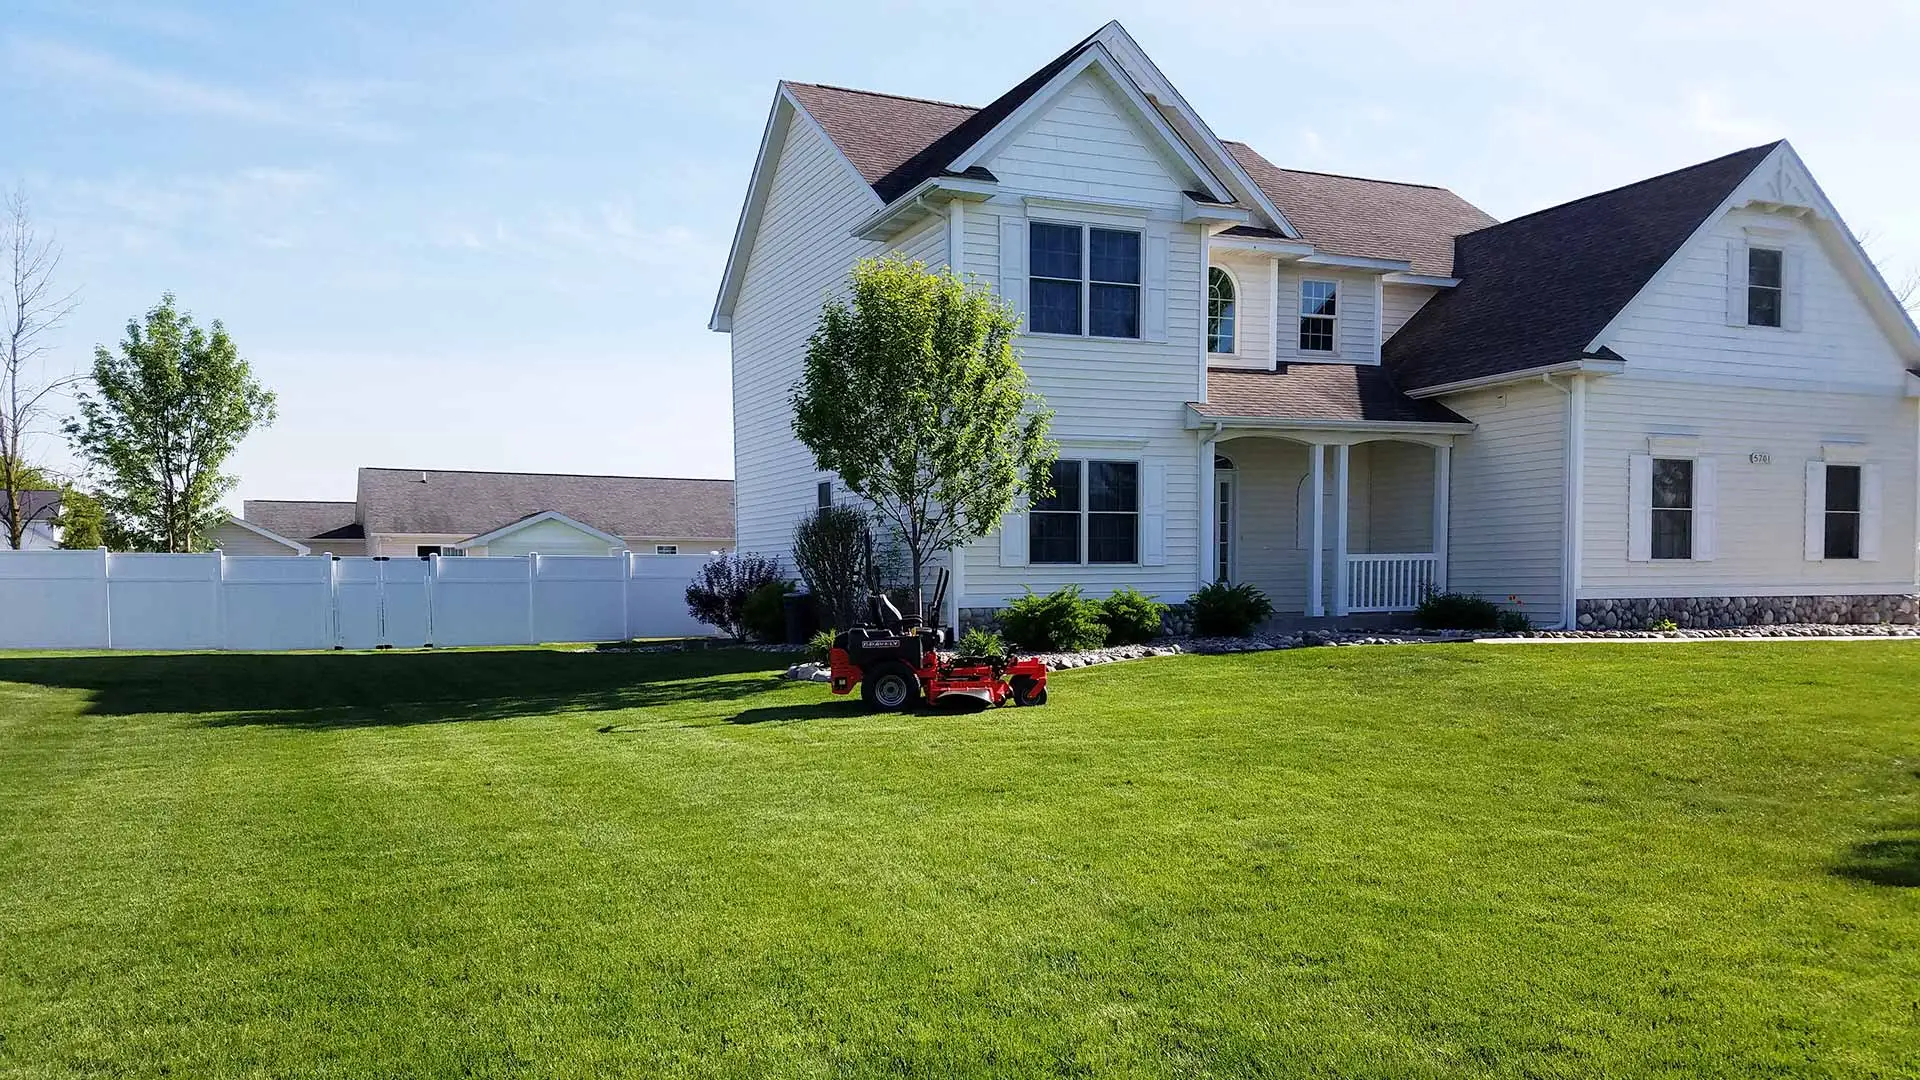 Large, freshly mowed front yard with a parked riding mower.